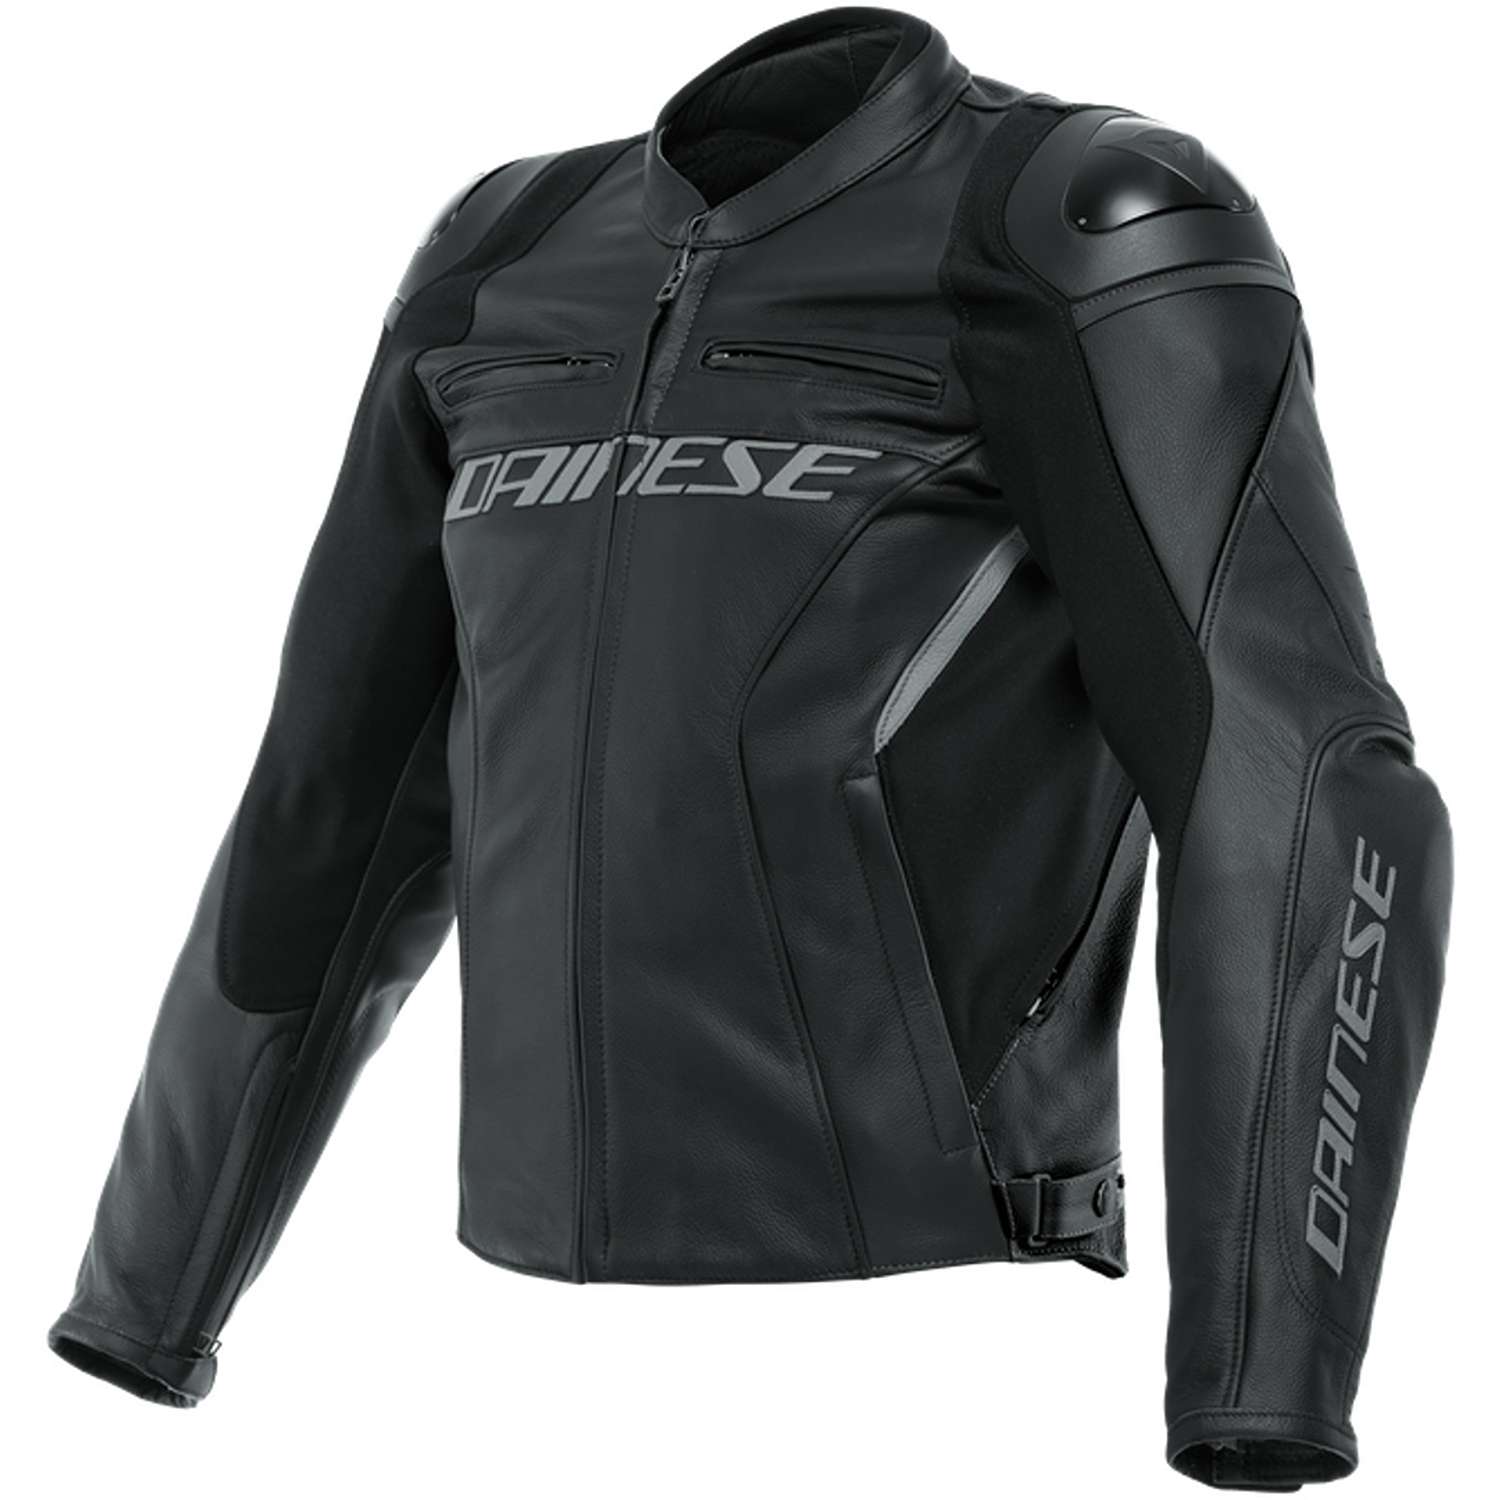 Image of EU Dainese Racing 4 Leather Jacket S/T Black Black Taille 30